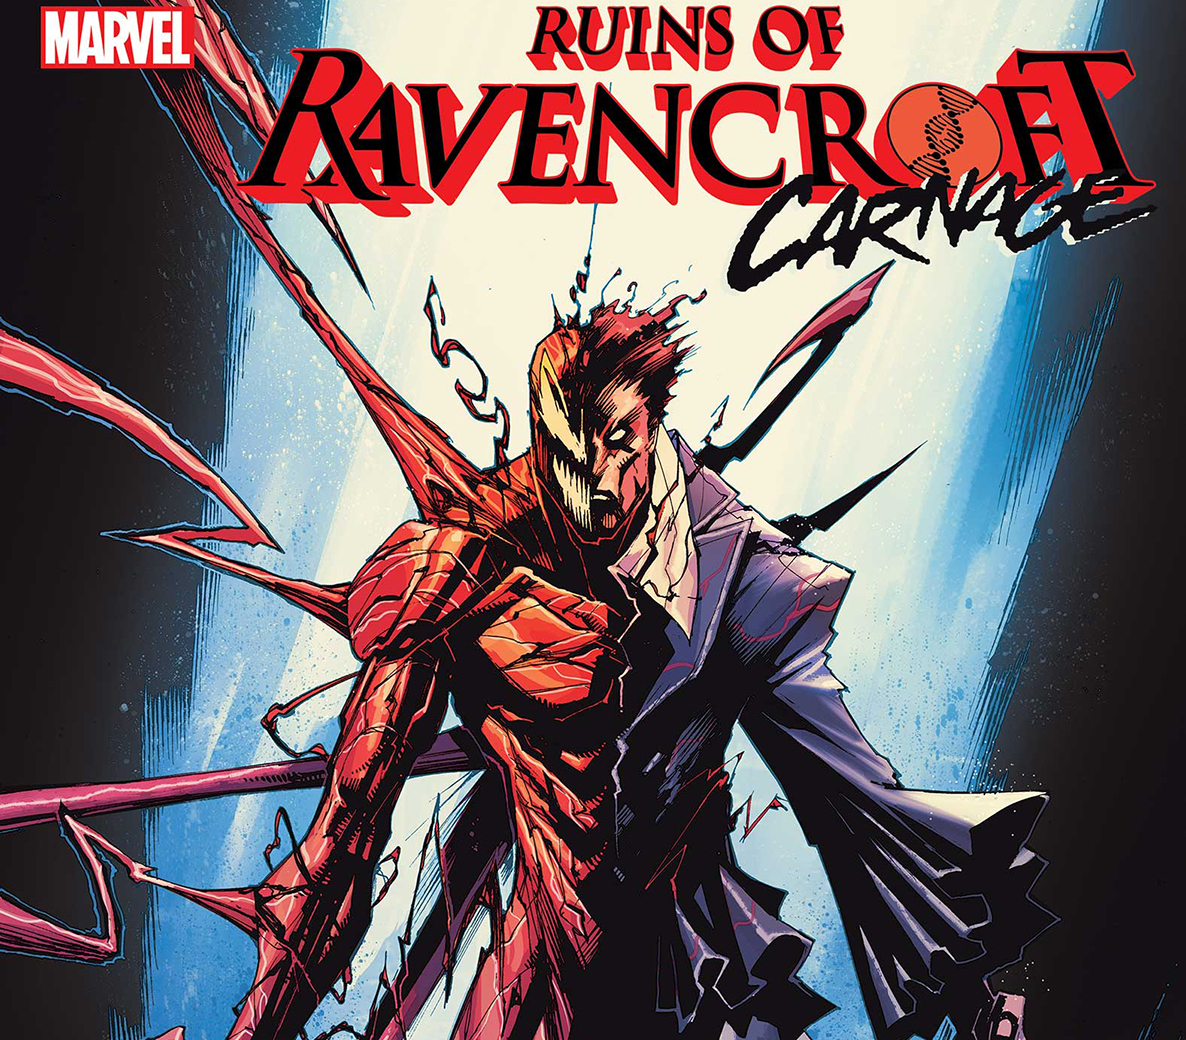 EXCLUSIVE Marvel First Look: Ruins of Ravencroft: Carnage #1